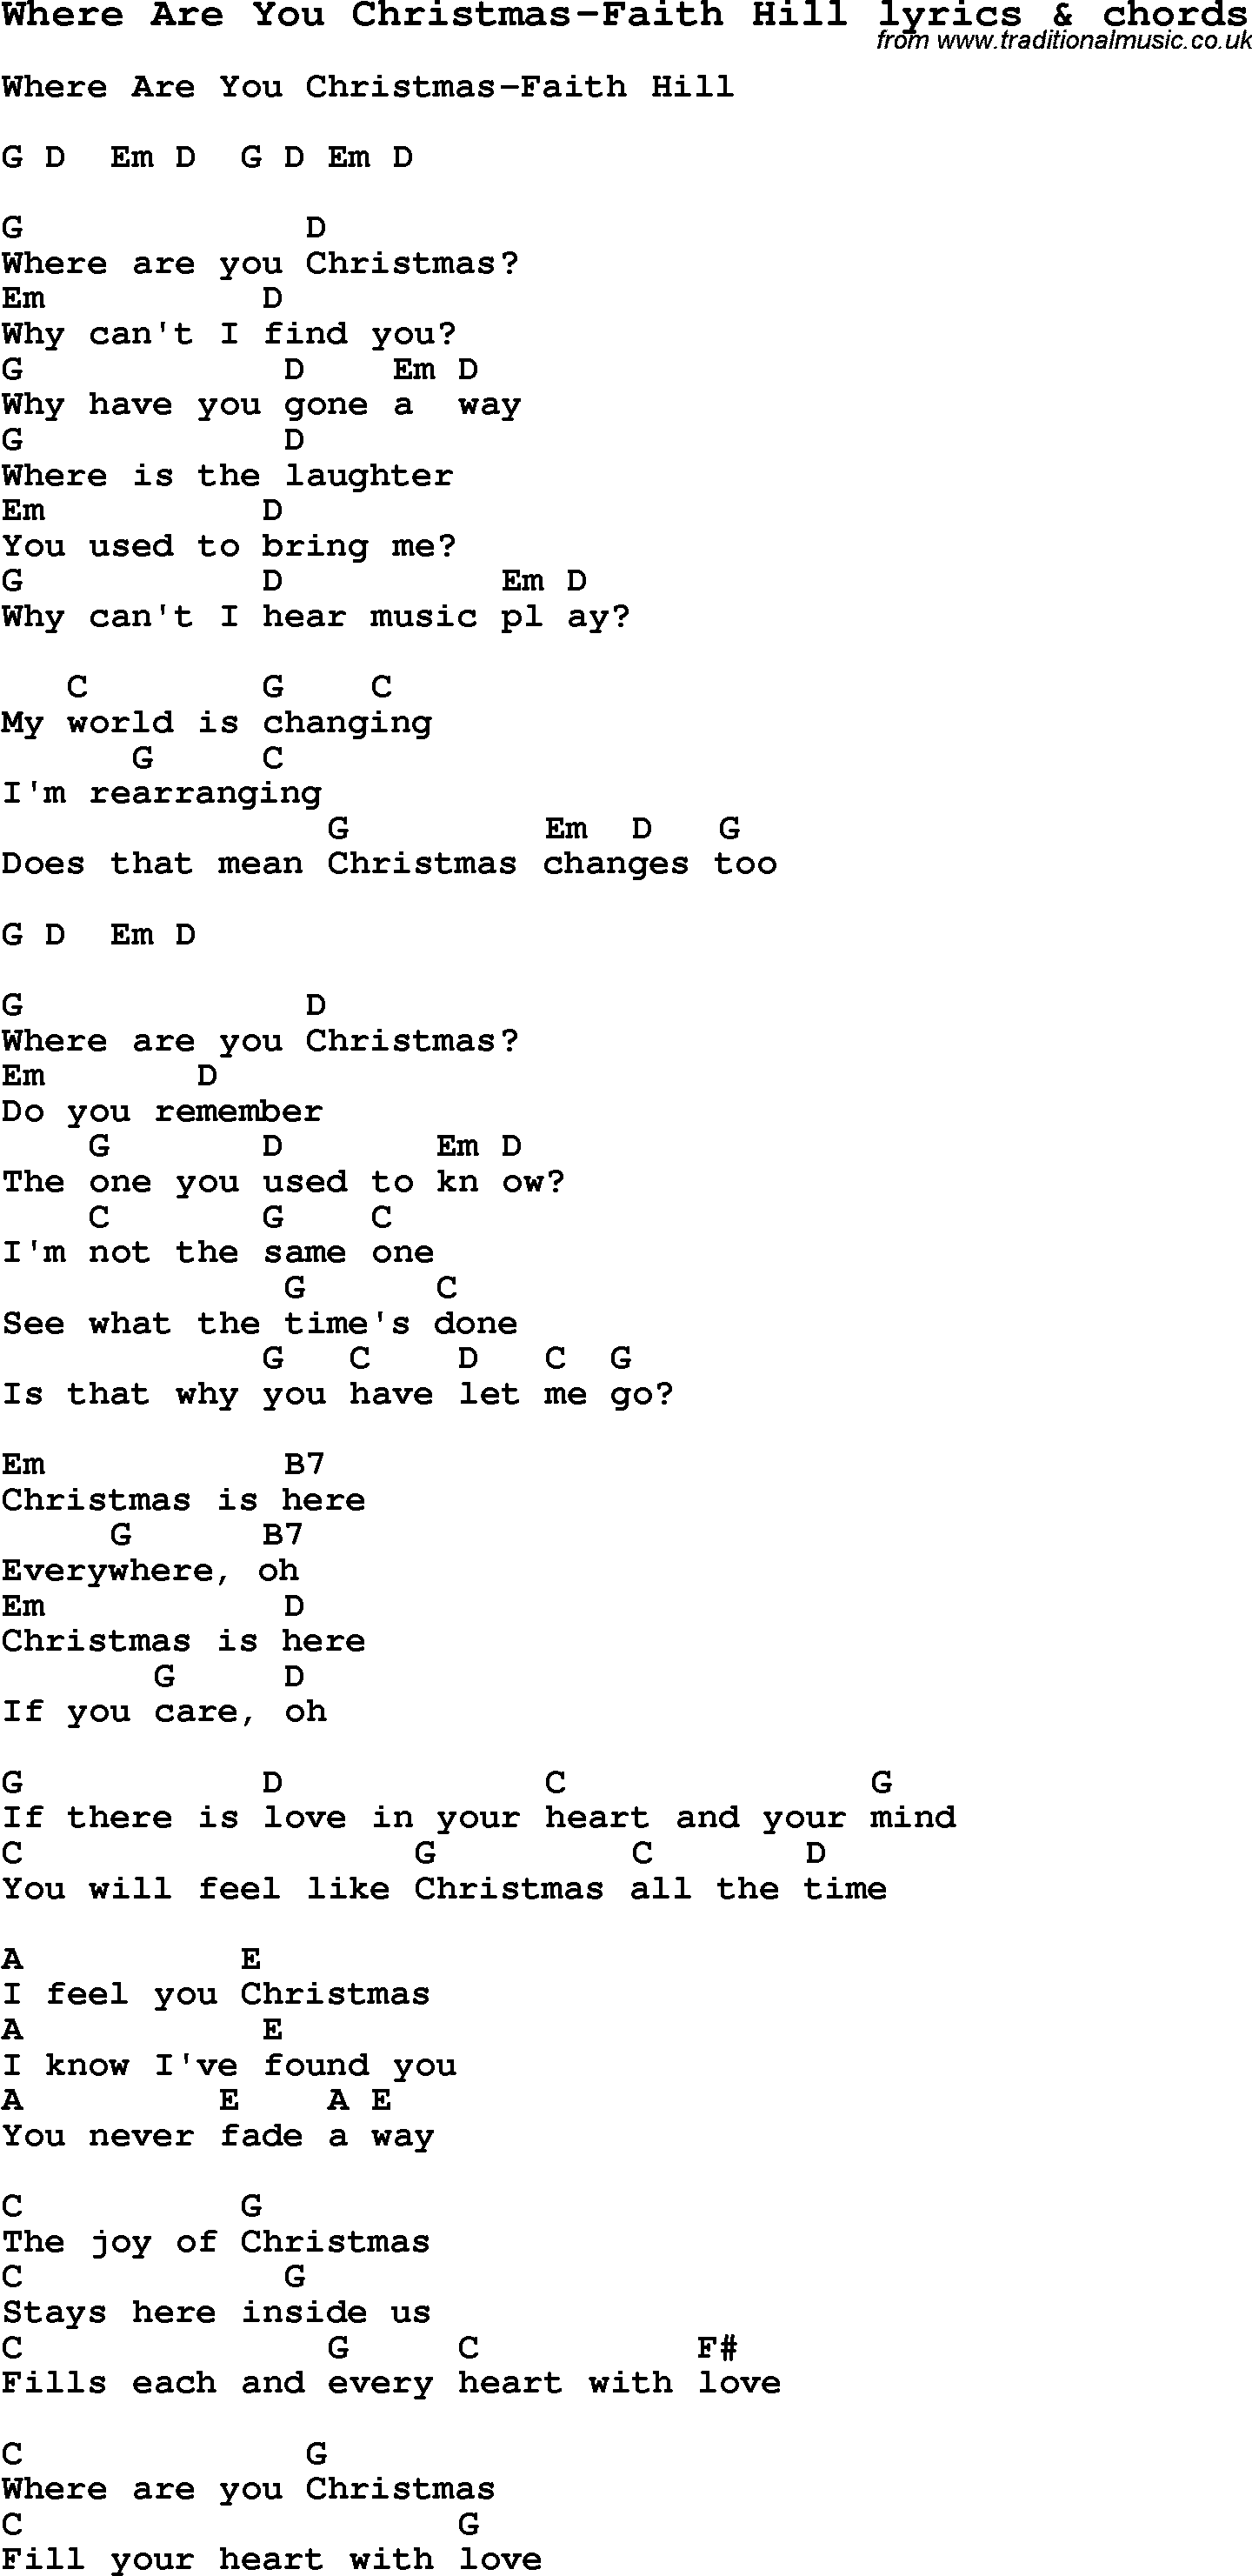 Love Song Lyrics for: Where Are You Christmas-Faith Hill with chords for Ukulele, Guitar Banjo etc.